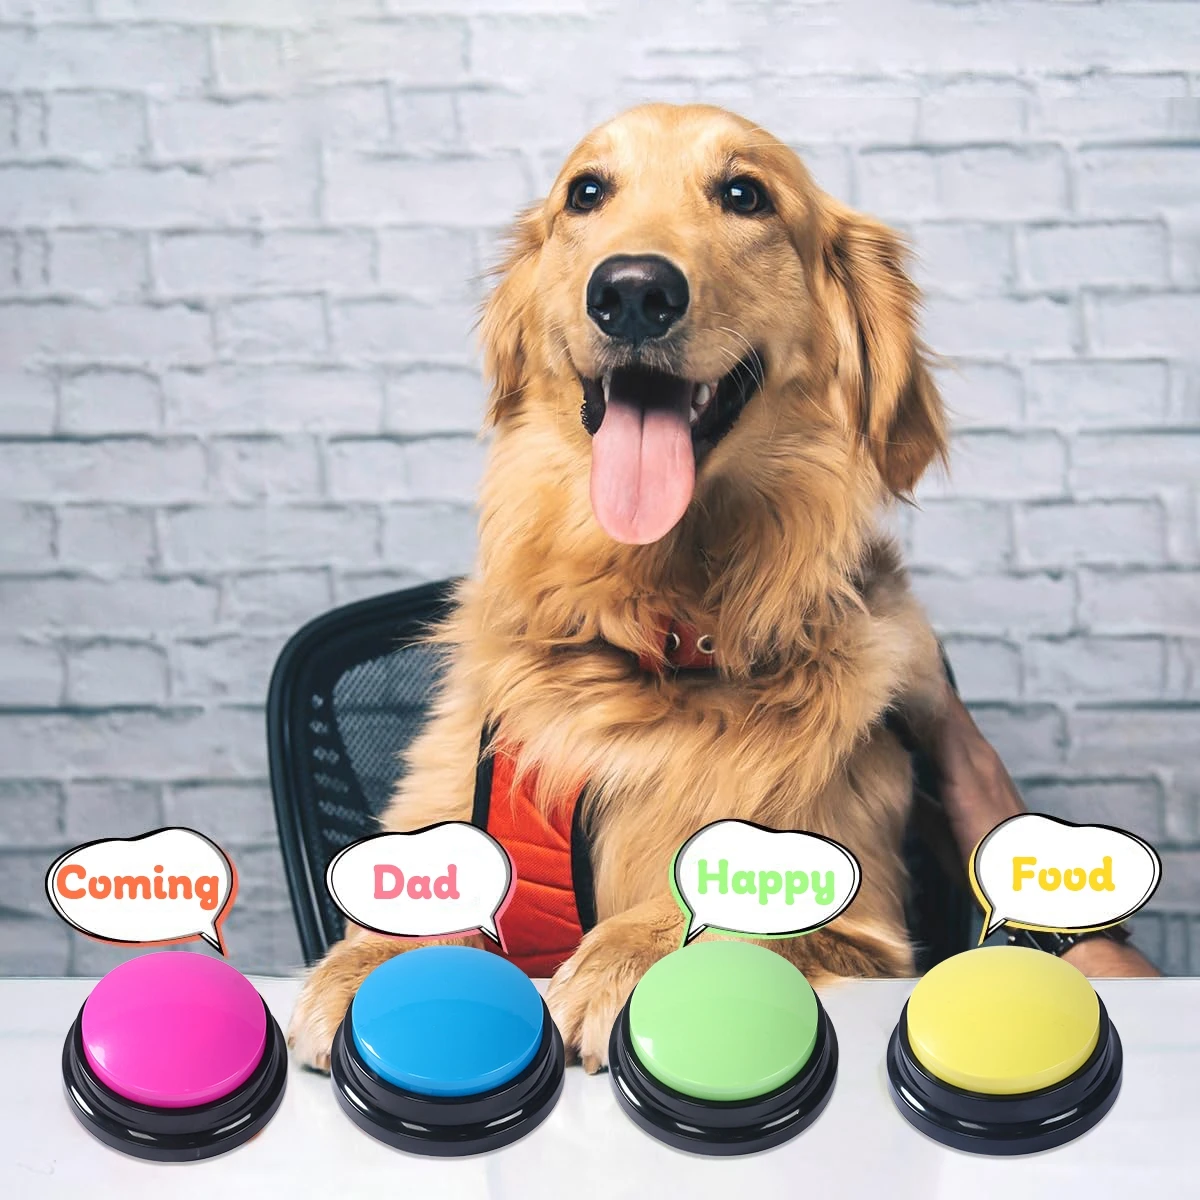 Recordable Talking Easy Carry Voice Recording Sound Button for Kids Pet Dog Interactive Toy Answering Buttons Party Noise Makers images - 6